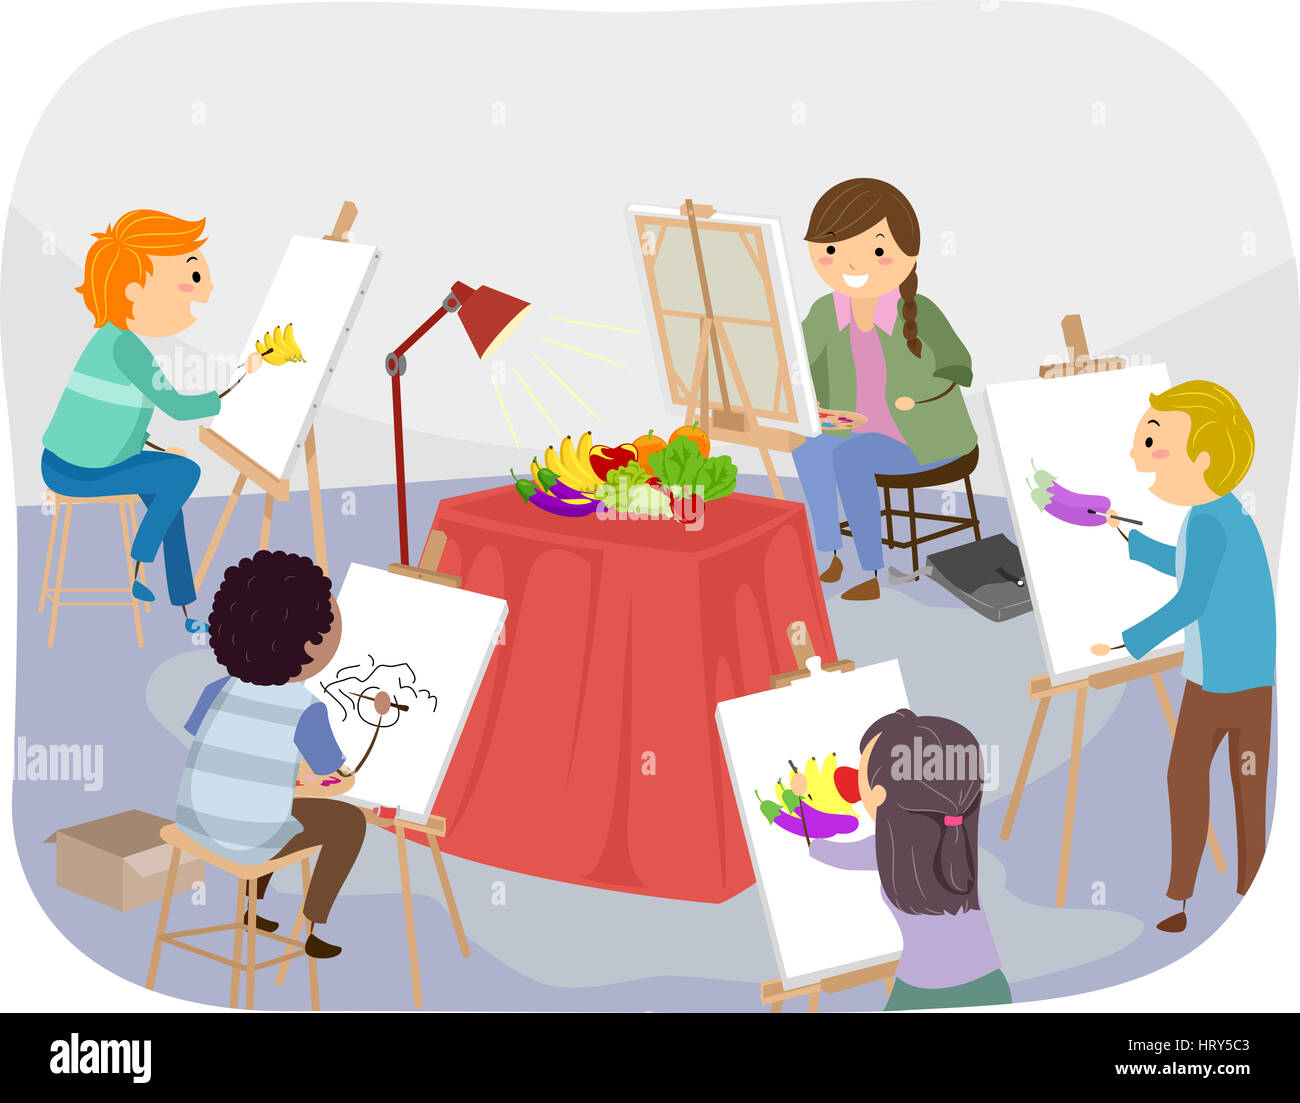 Illustration of Teens Painting Fruits Inside a Studio Stock Photo